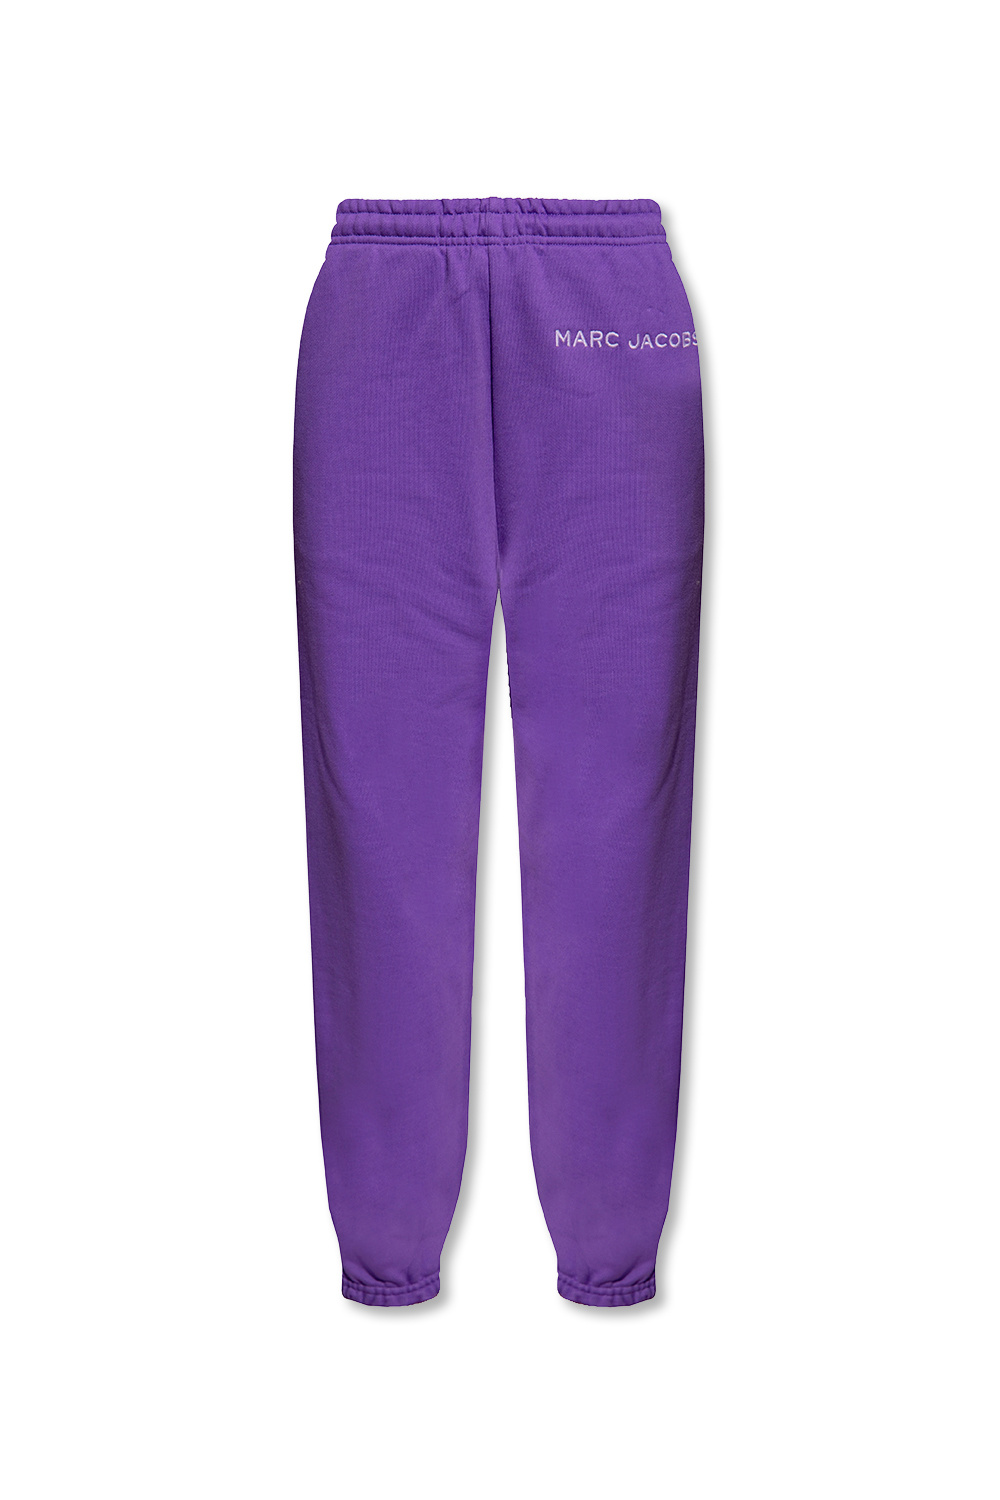 Marc Jacobs (The) Sweatpants with logo